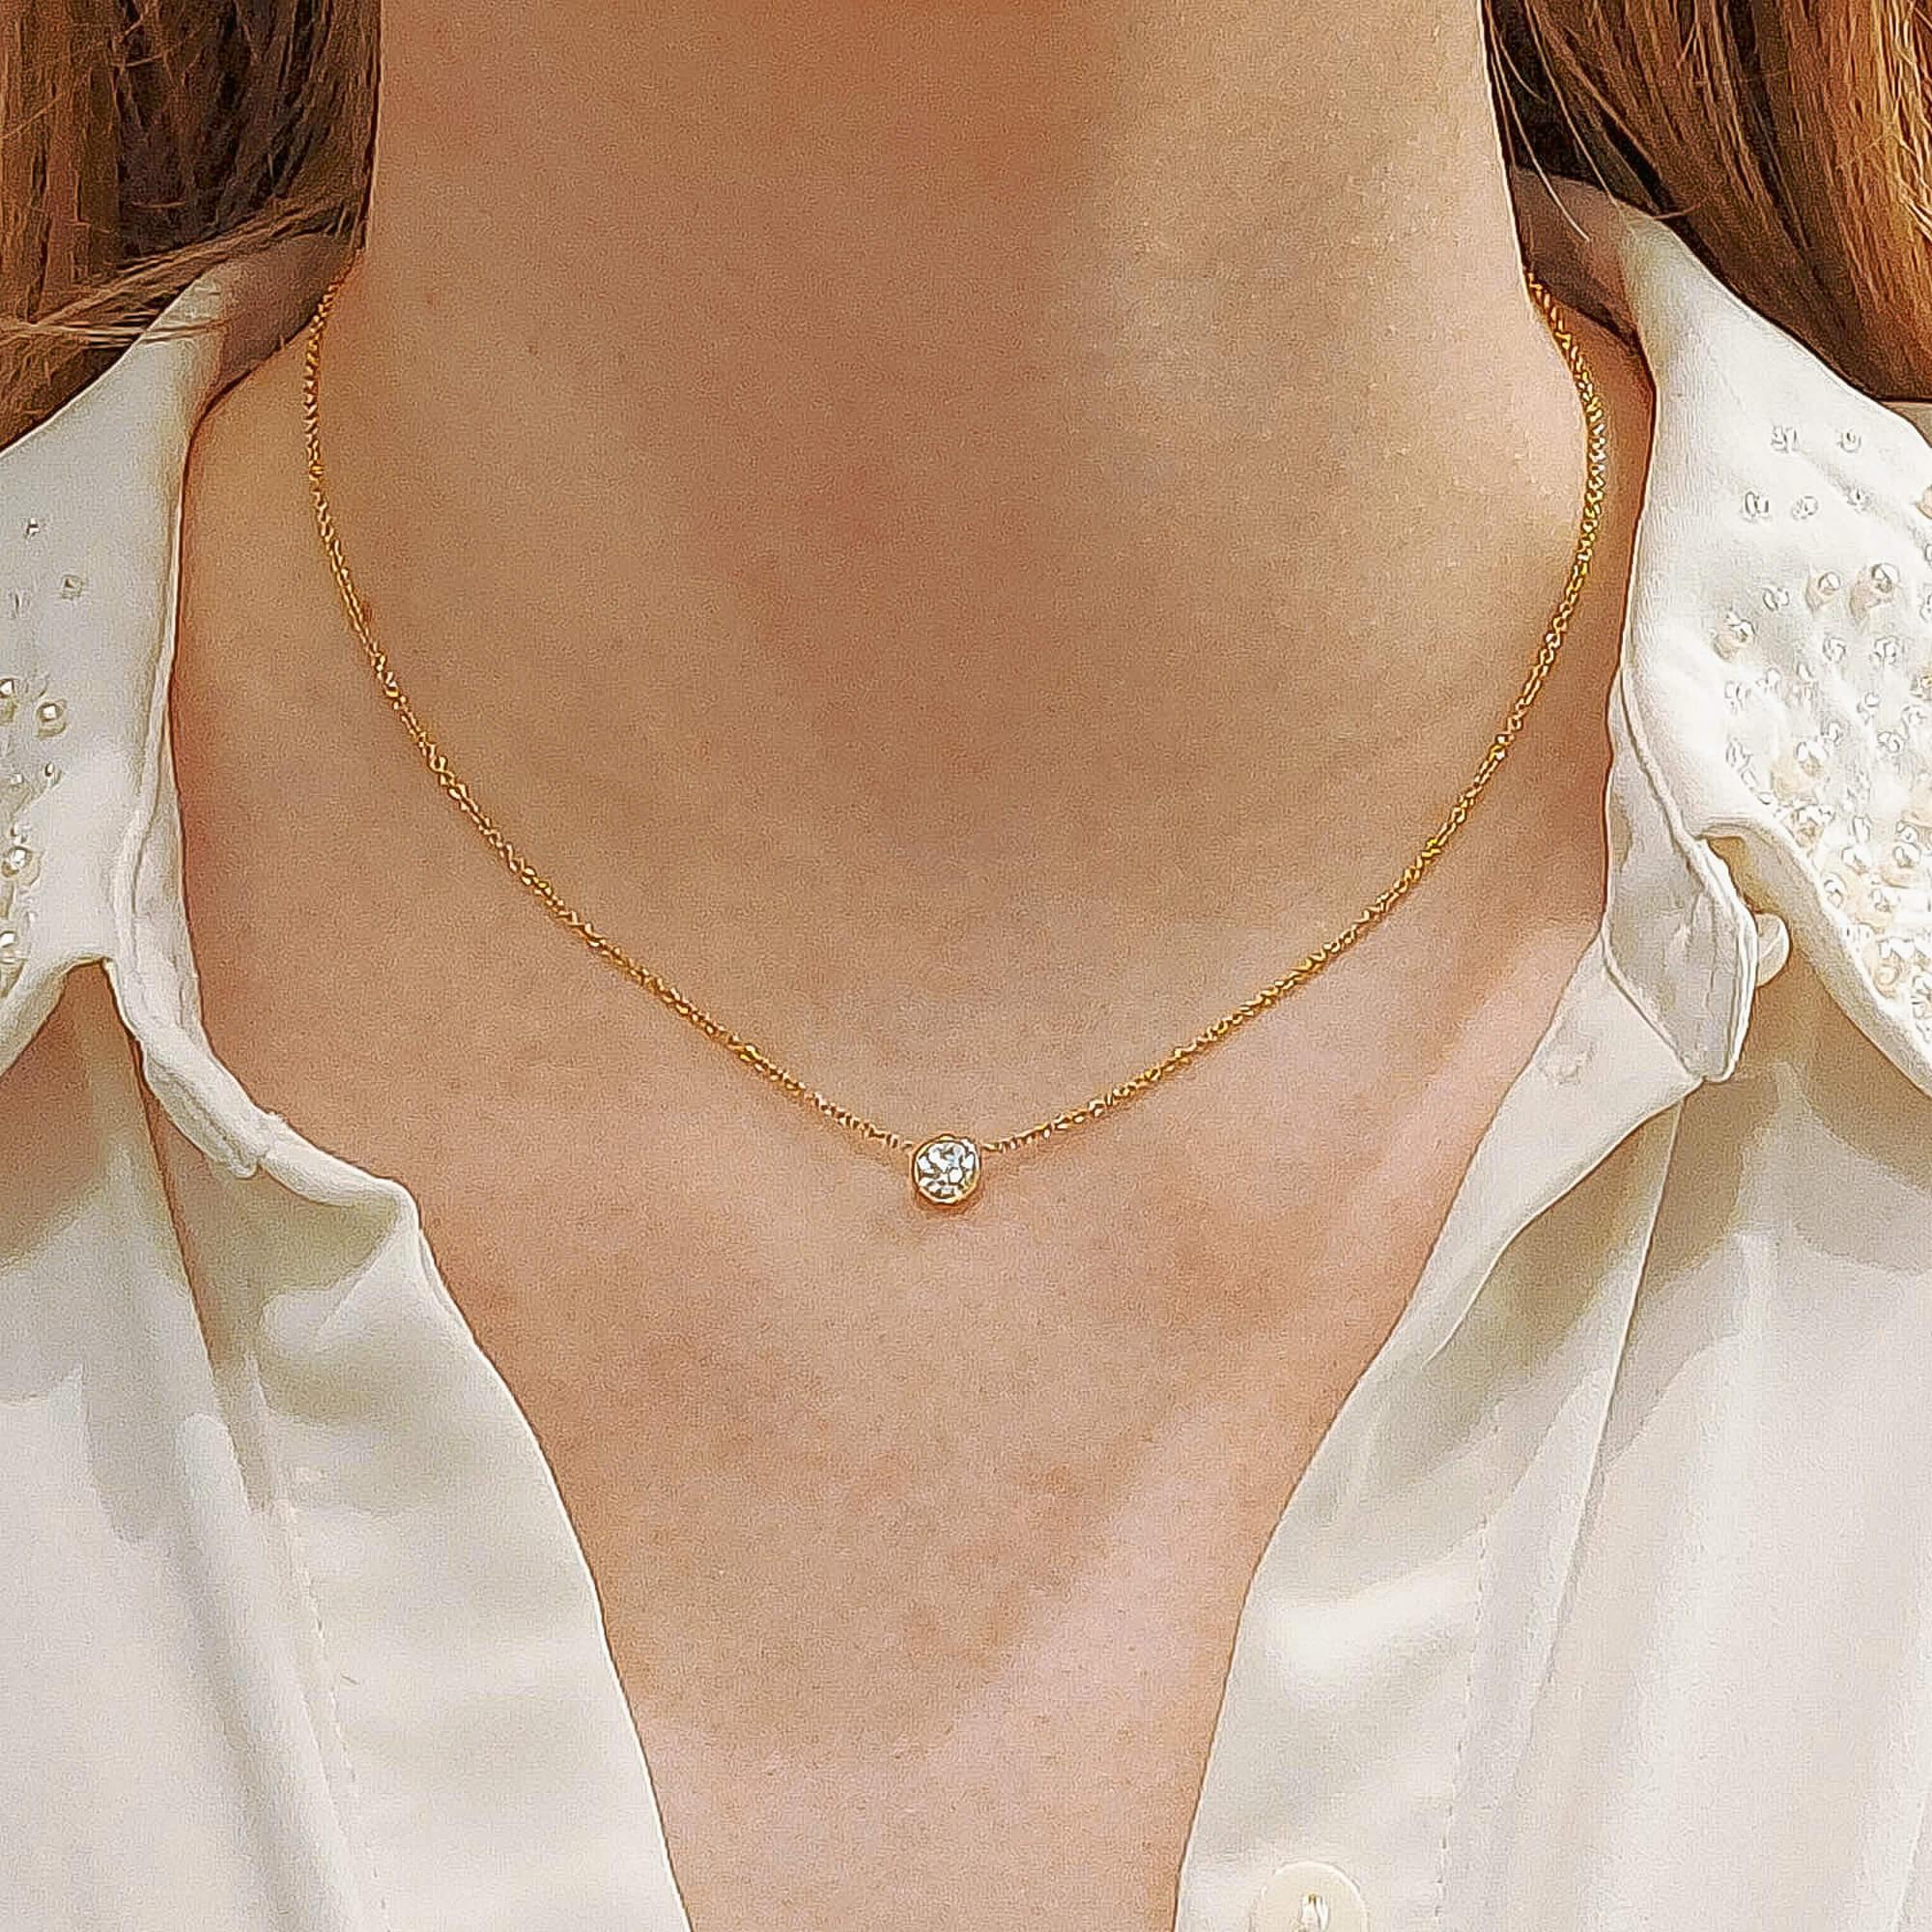 A simple yet incredibly elegant round brilliant cut diamond single stone pendant set in 18k yellow gold.

The necklace is solely set with a single round brilliant cut diamond which is securely encased in a spectacle setting. The true beauty of this